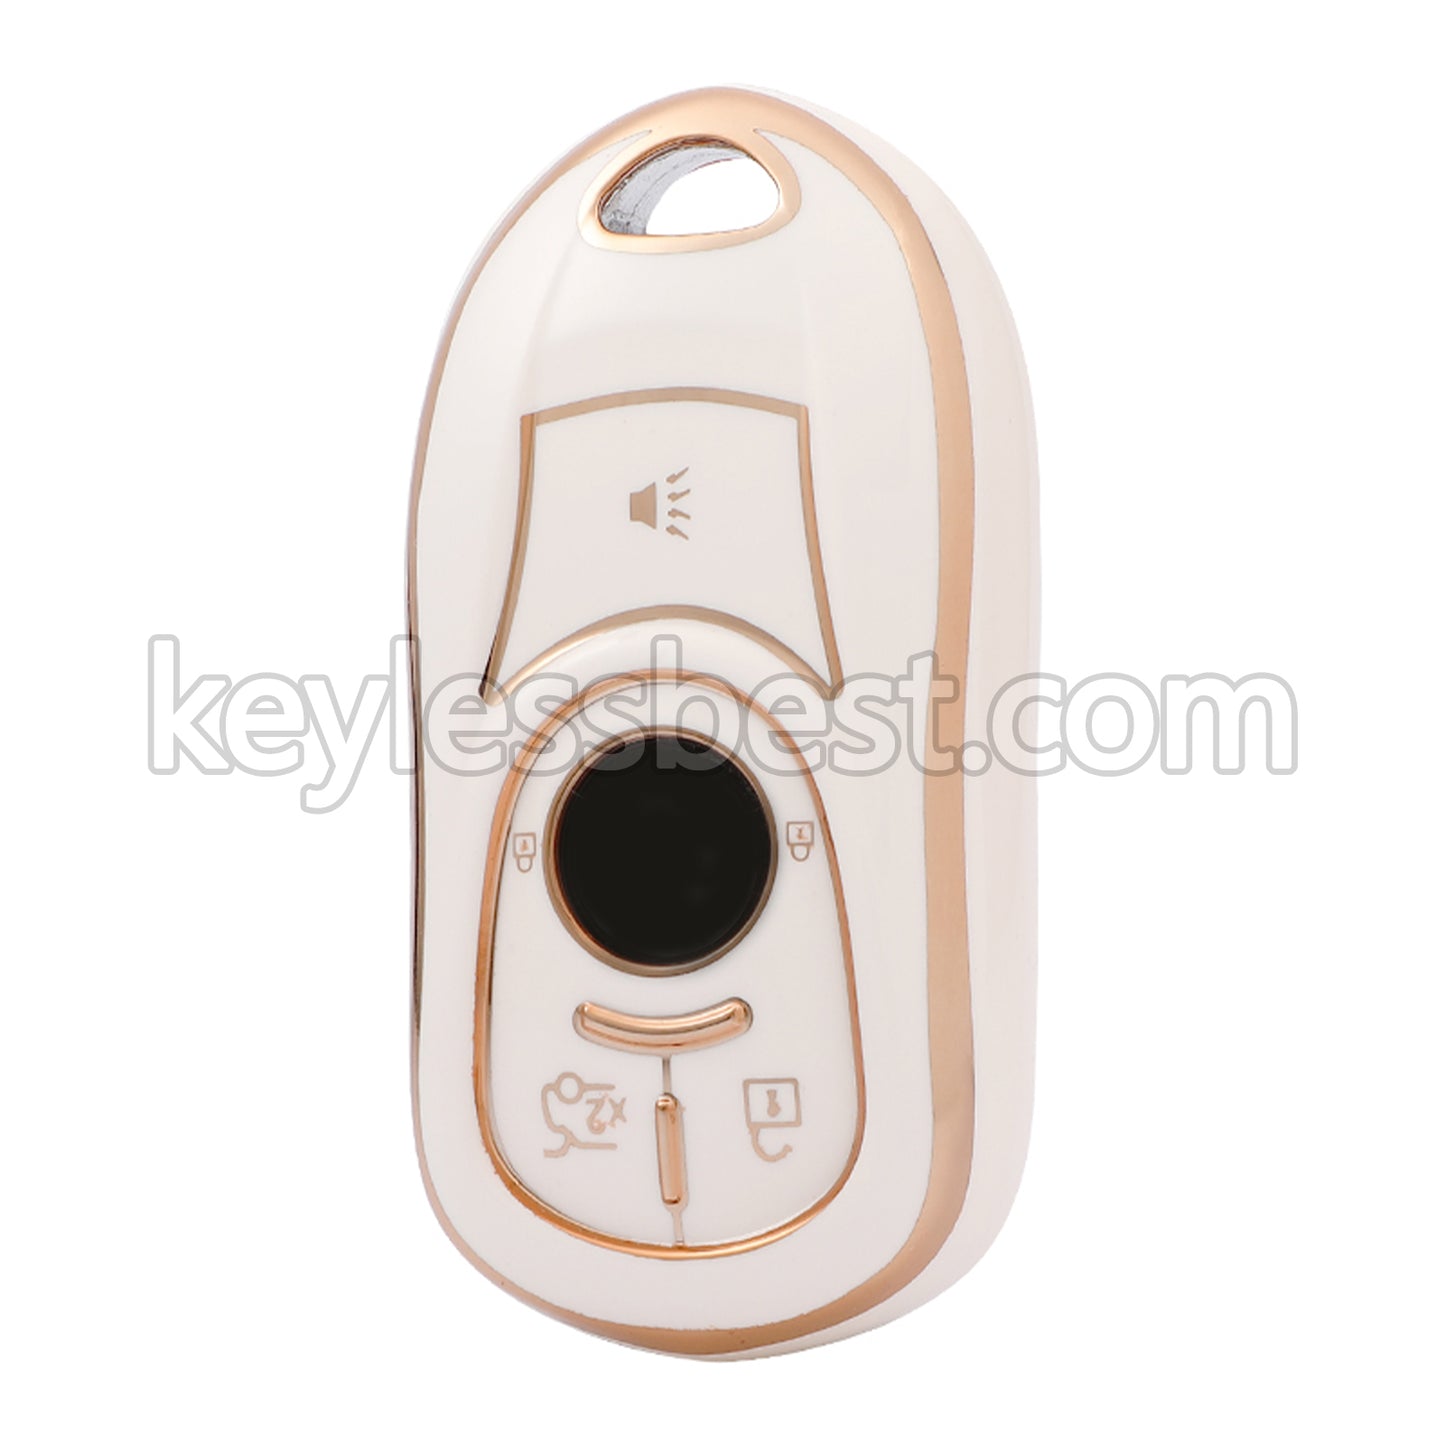 TPU Car Key cover For Buick Car Key cover case holder